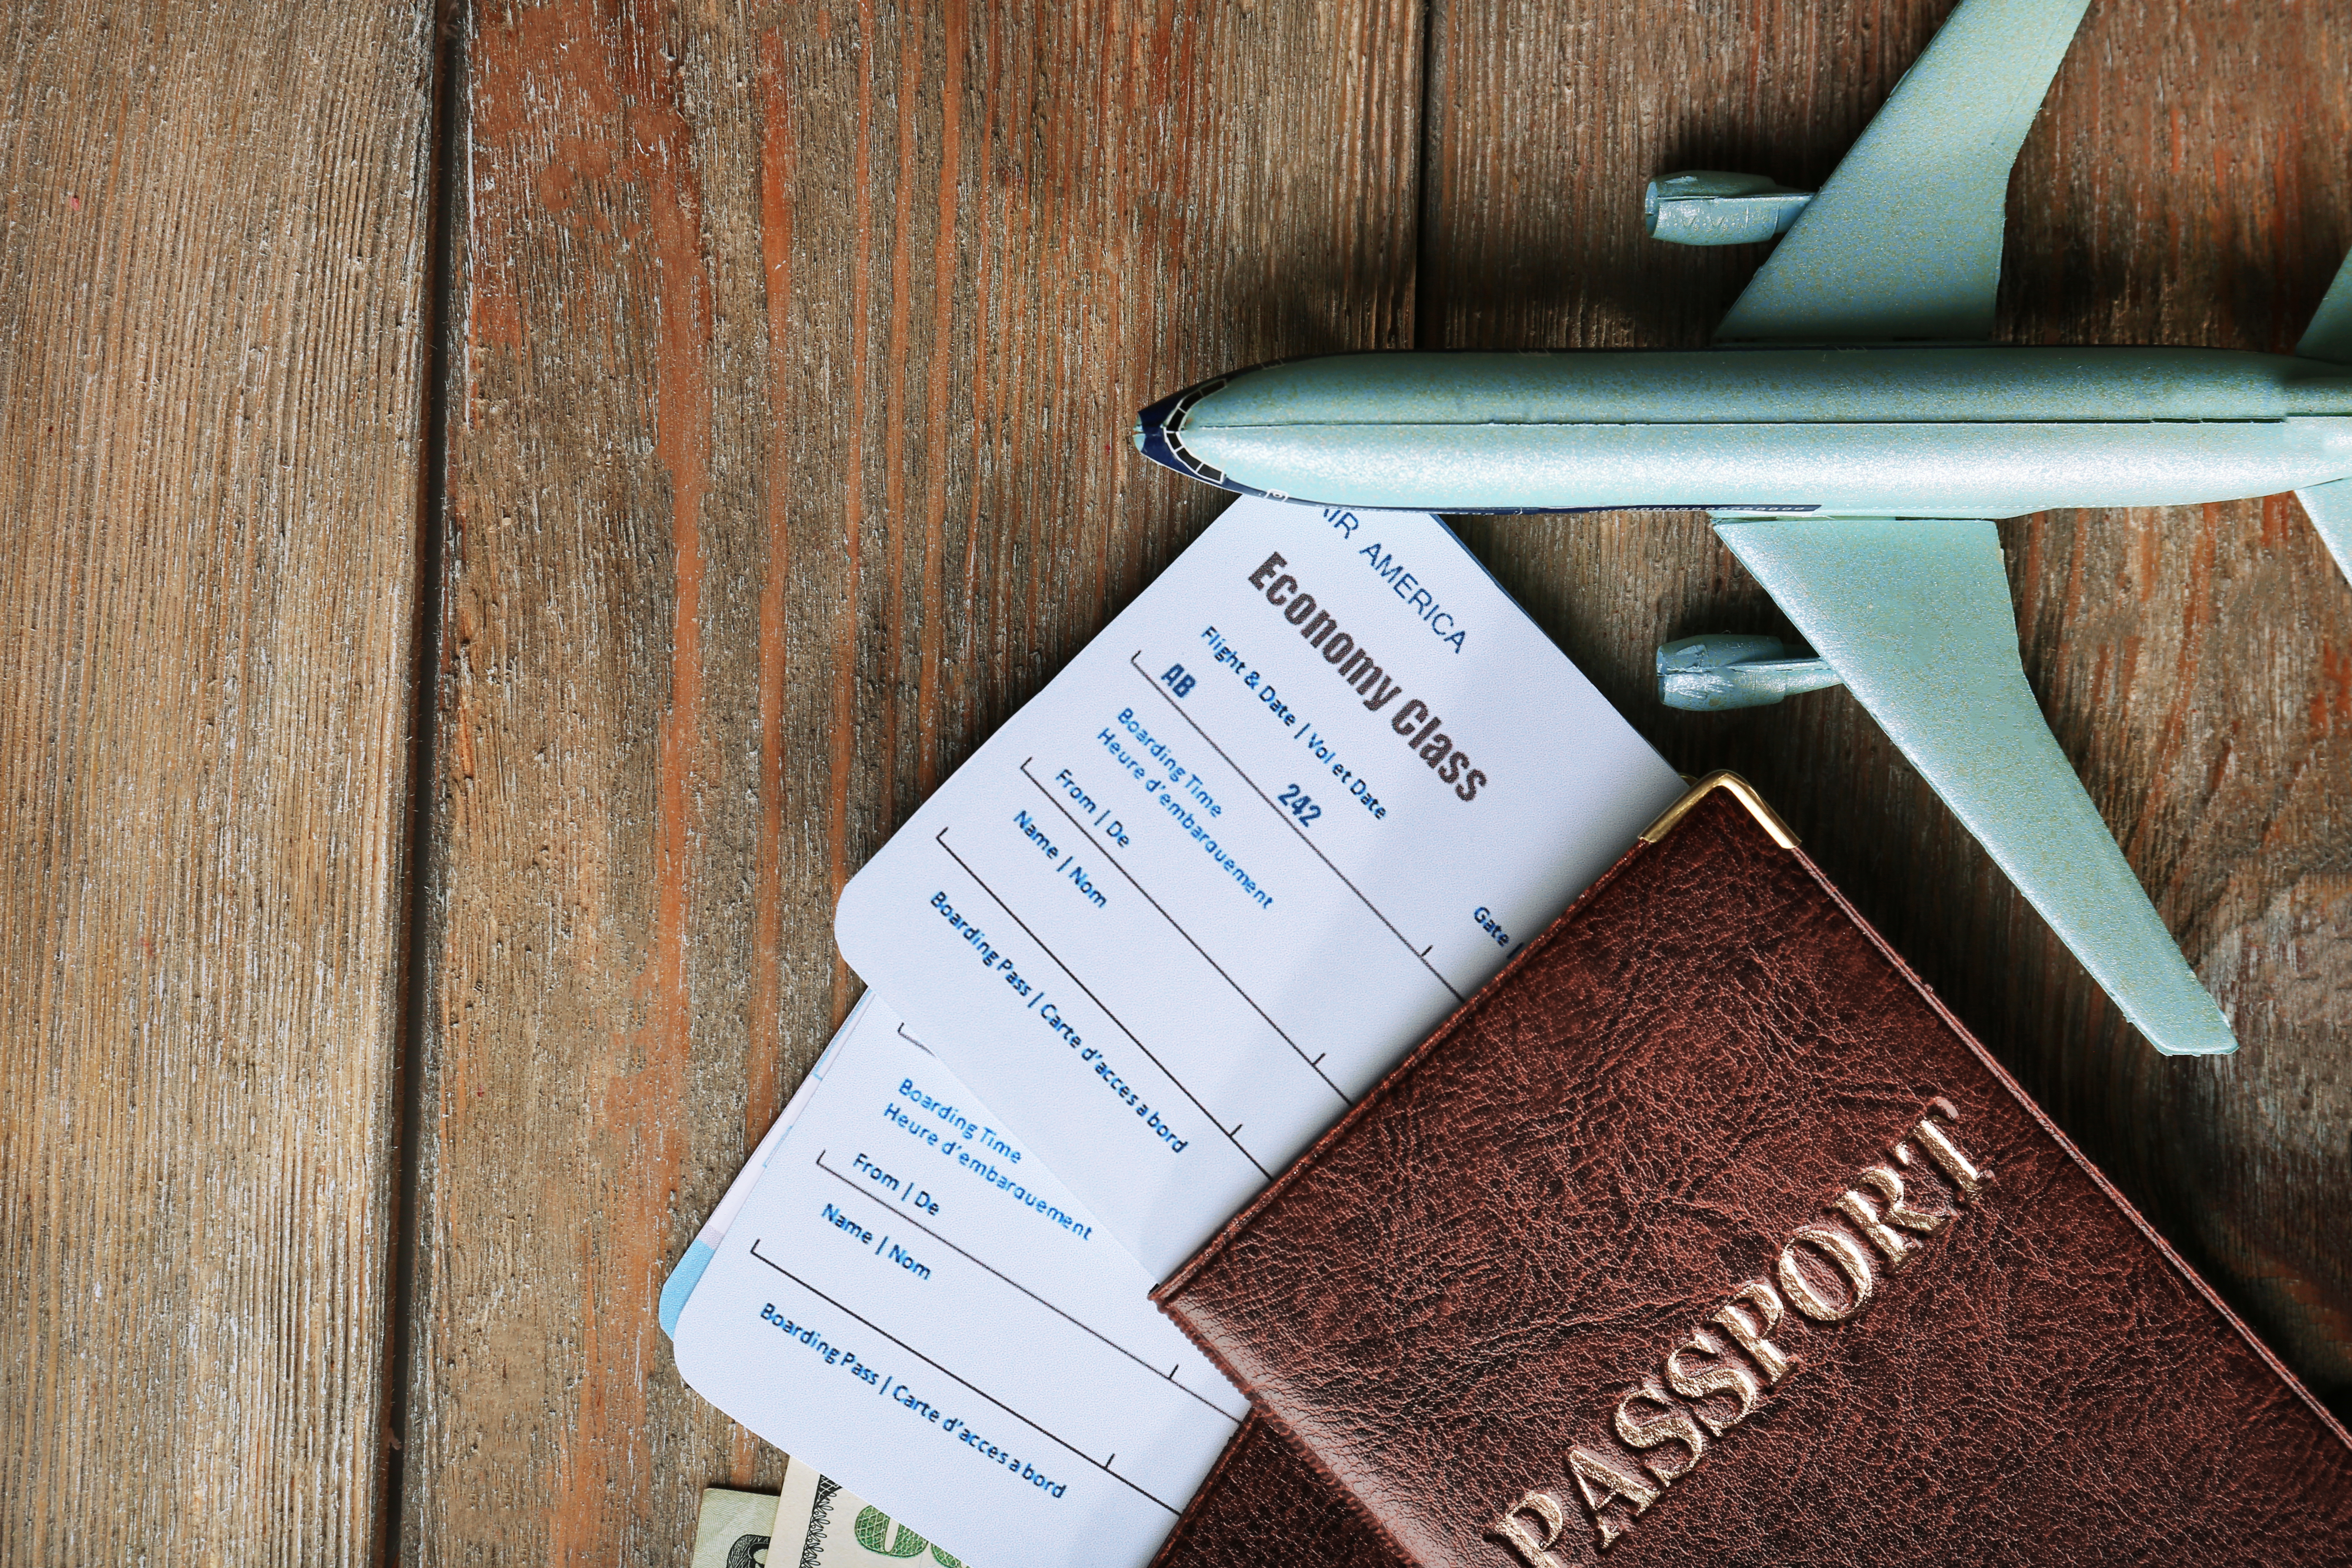 Two passports with plane tickets and a plane figurine | Source: Shutterstock